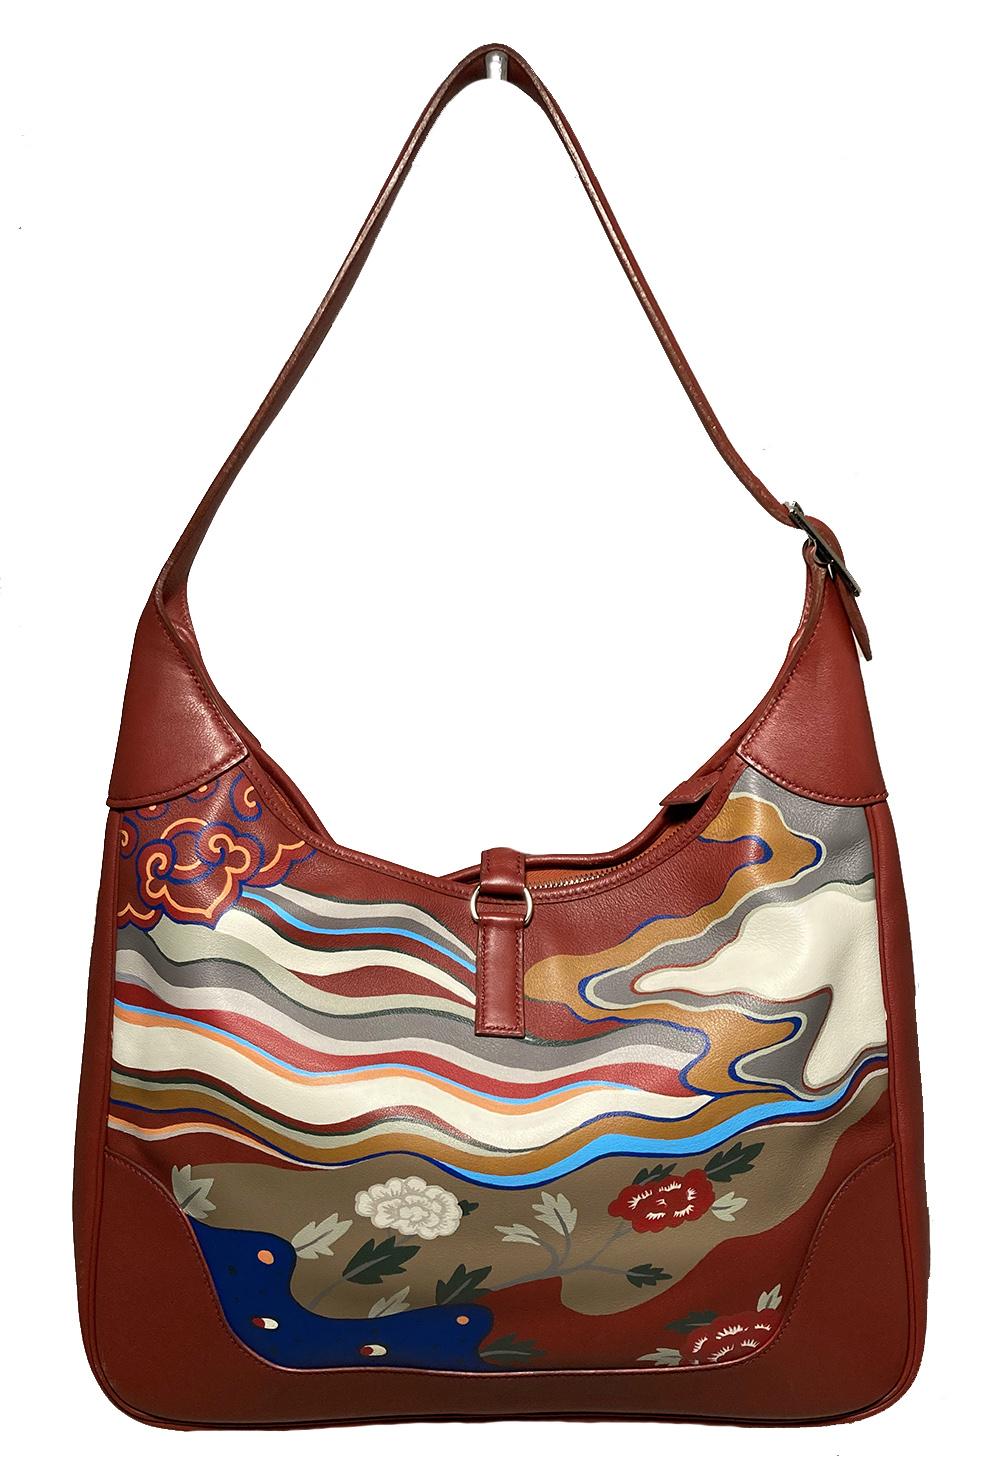 Hermes Red Trim Bag Hand Painted in excellent condition. Brick red swift leather exterior featuring an original hand painted artistic landscape with blue, green, tan, beige, orange and white throughout. Silver palladium hardware. Top zipper opens to